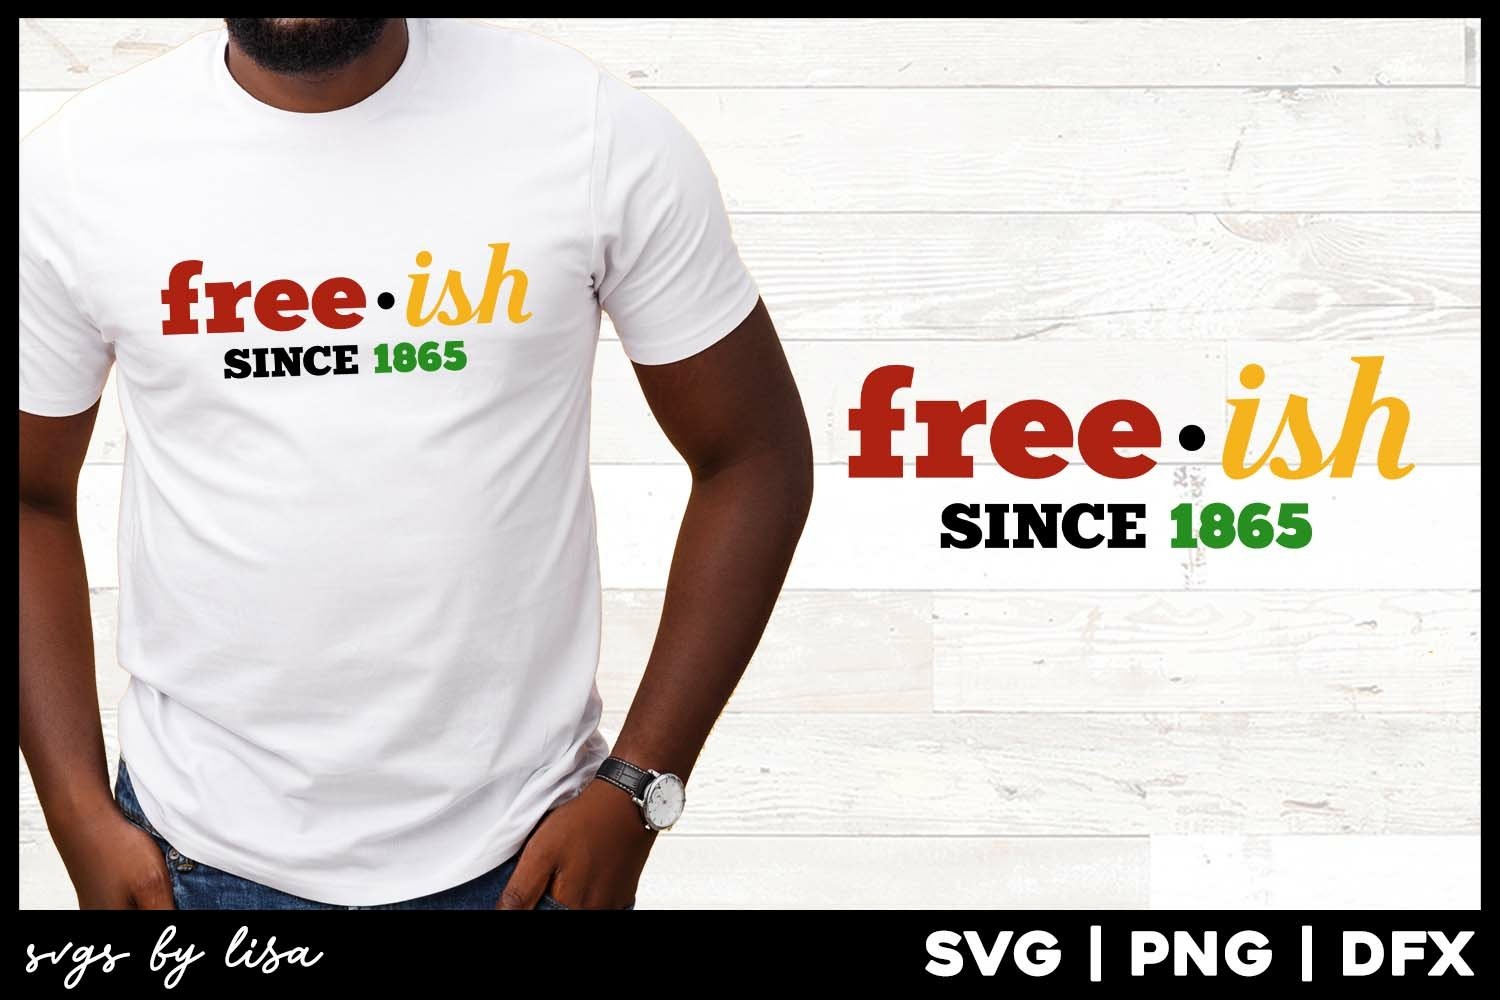 Free-ish since 1865 - colorful print.